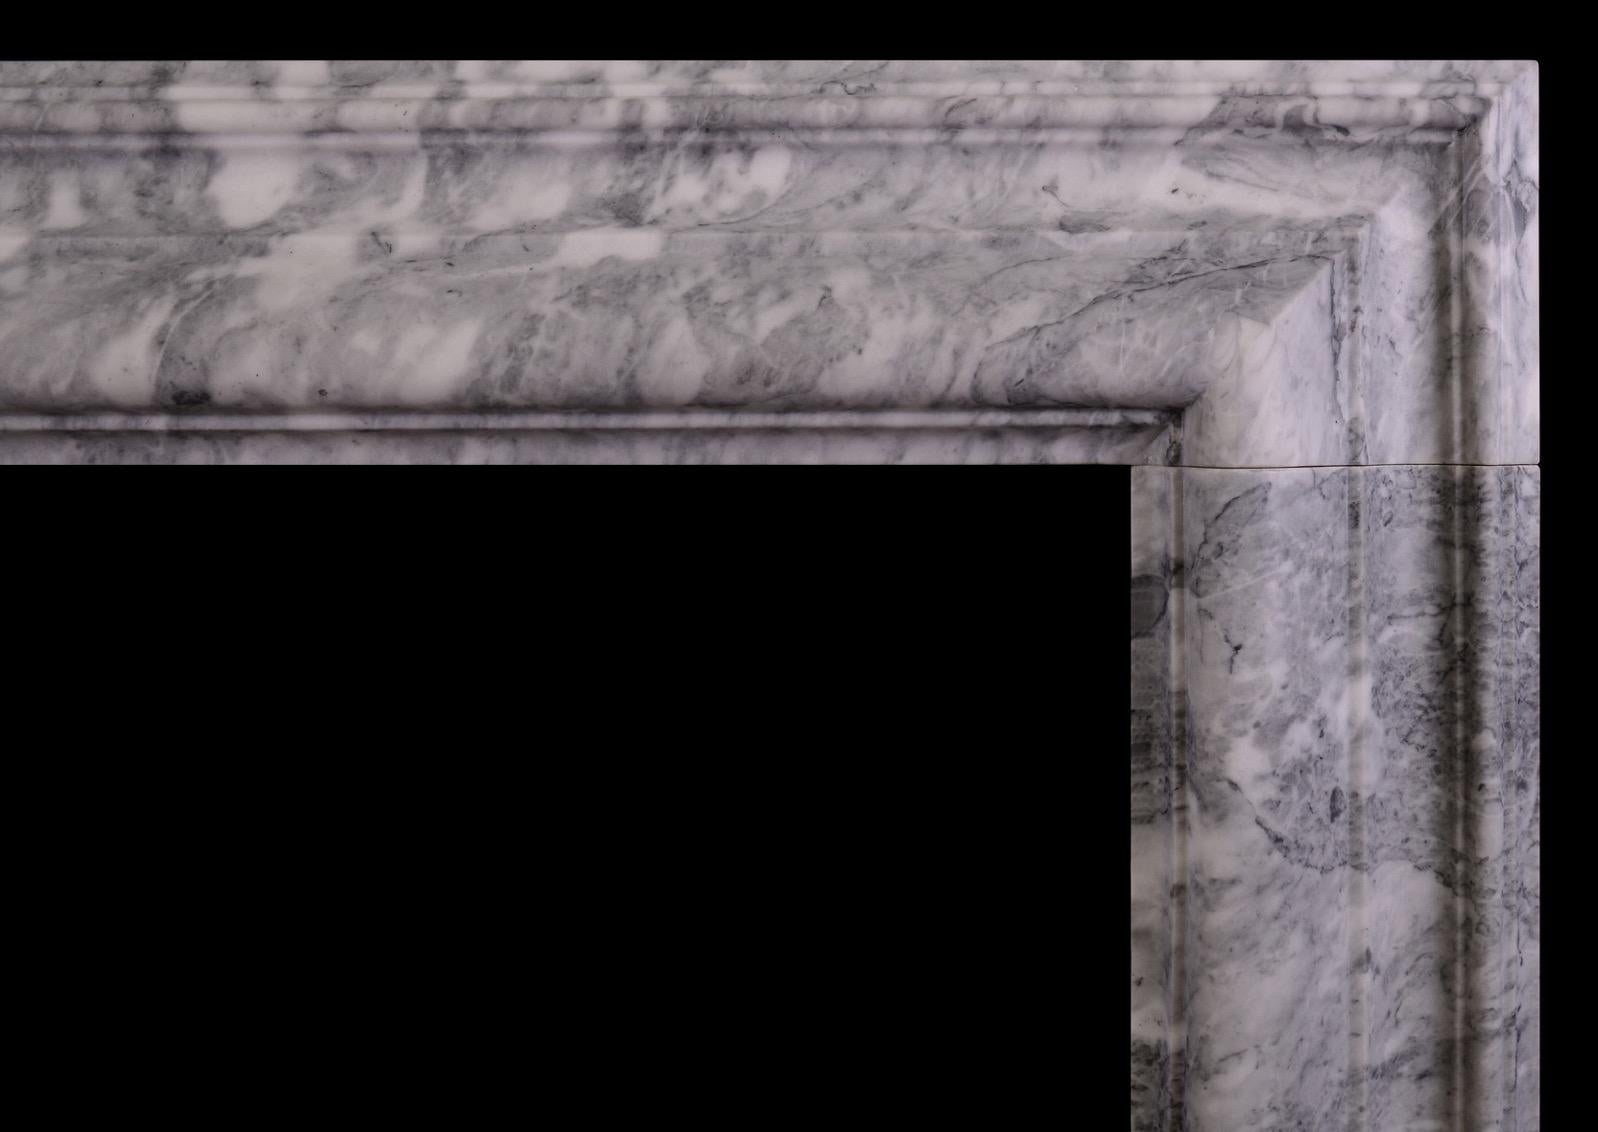  good quality English bolection with moulded frieze and jambs in the classic Queen Anne style. Moulded plinths that follow jamb moulding. English, modern. An interesting mottled grey marble with mild veining in parts. N.B. May be subject to an